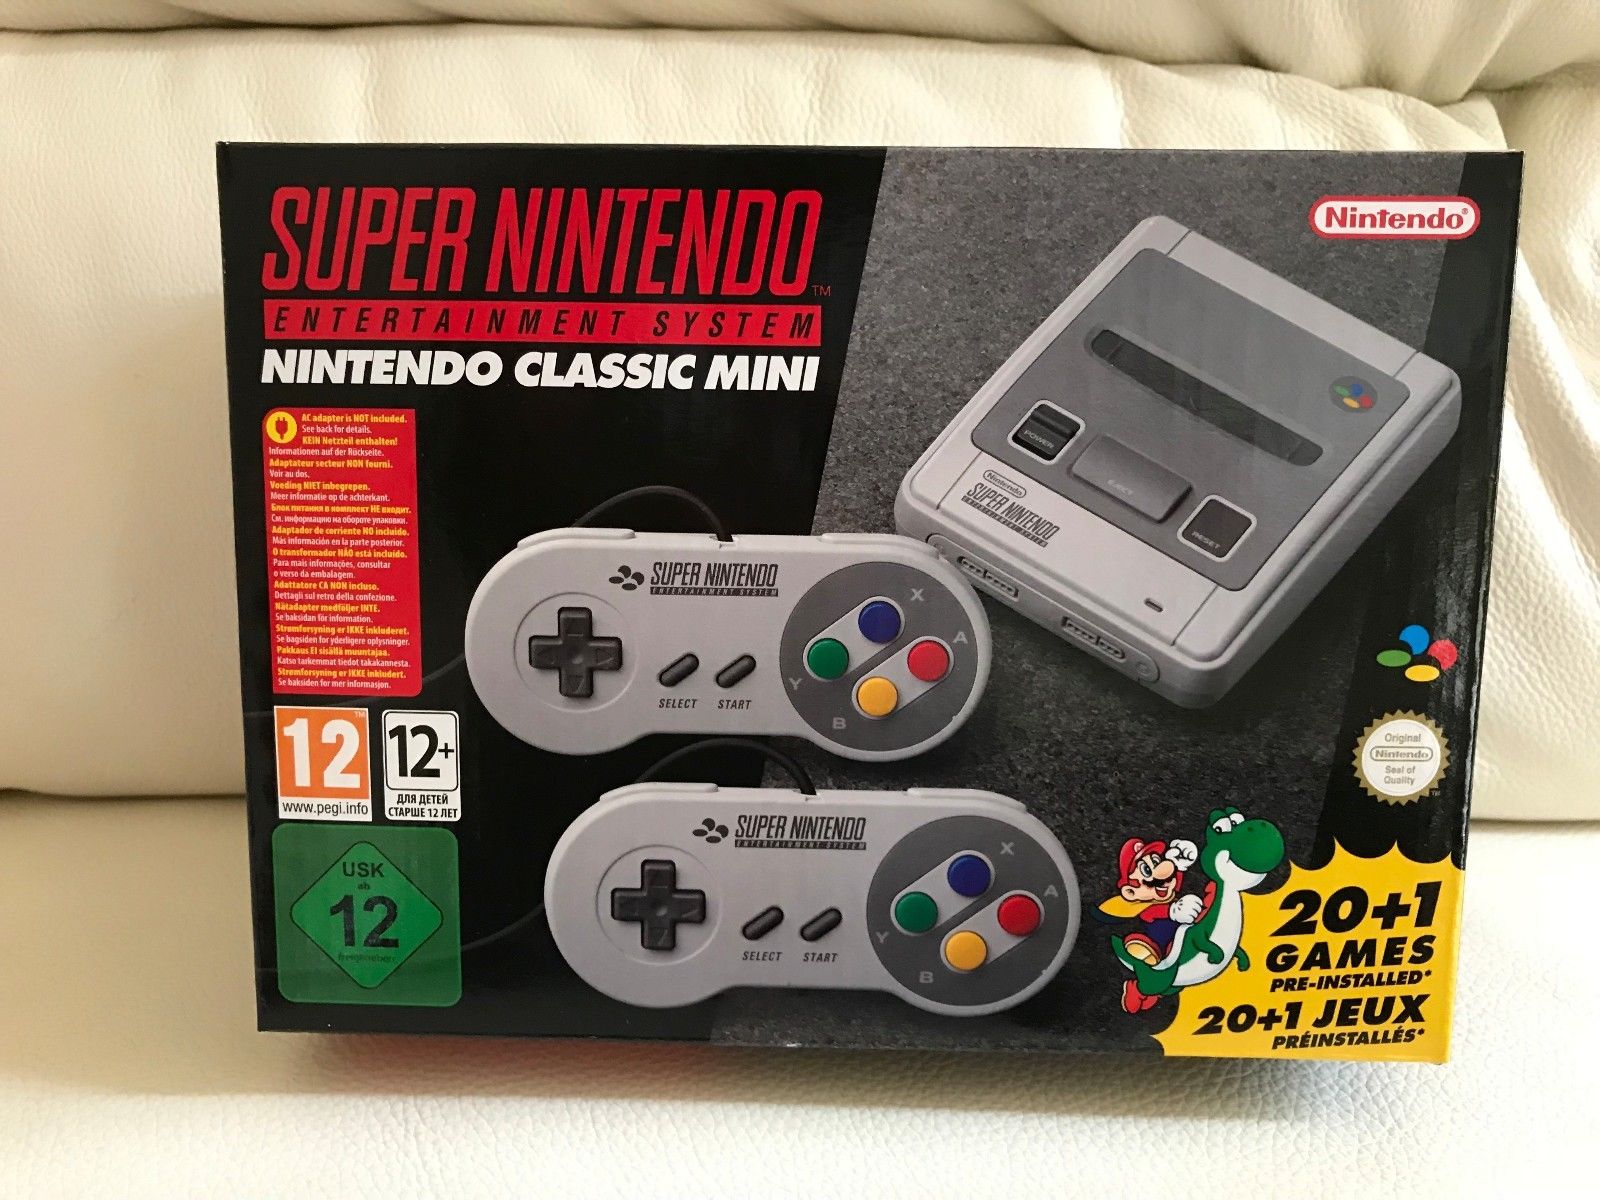 BRAND NEW NINTENDO SNES MINI CONSOLE WITH 2 CONTROLLERS